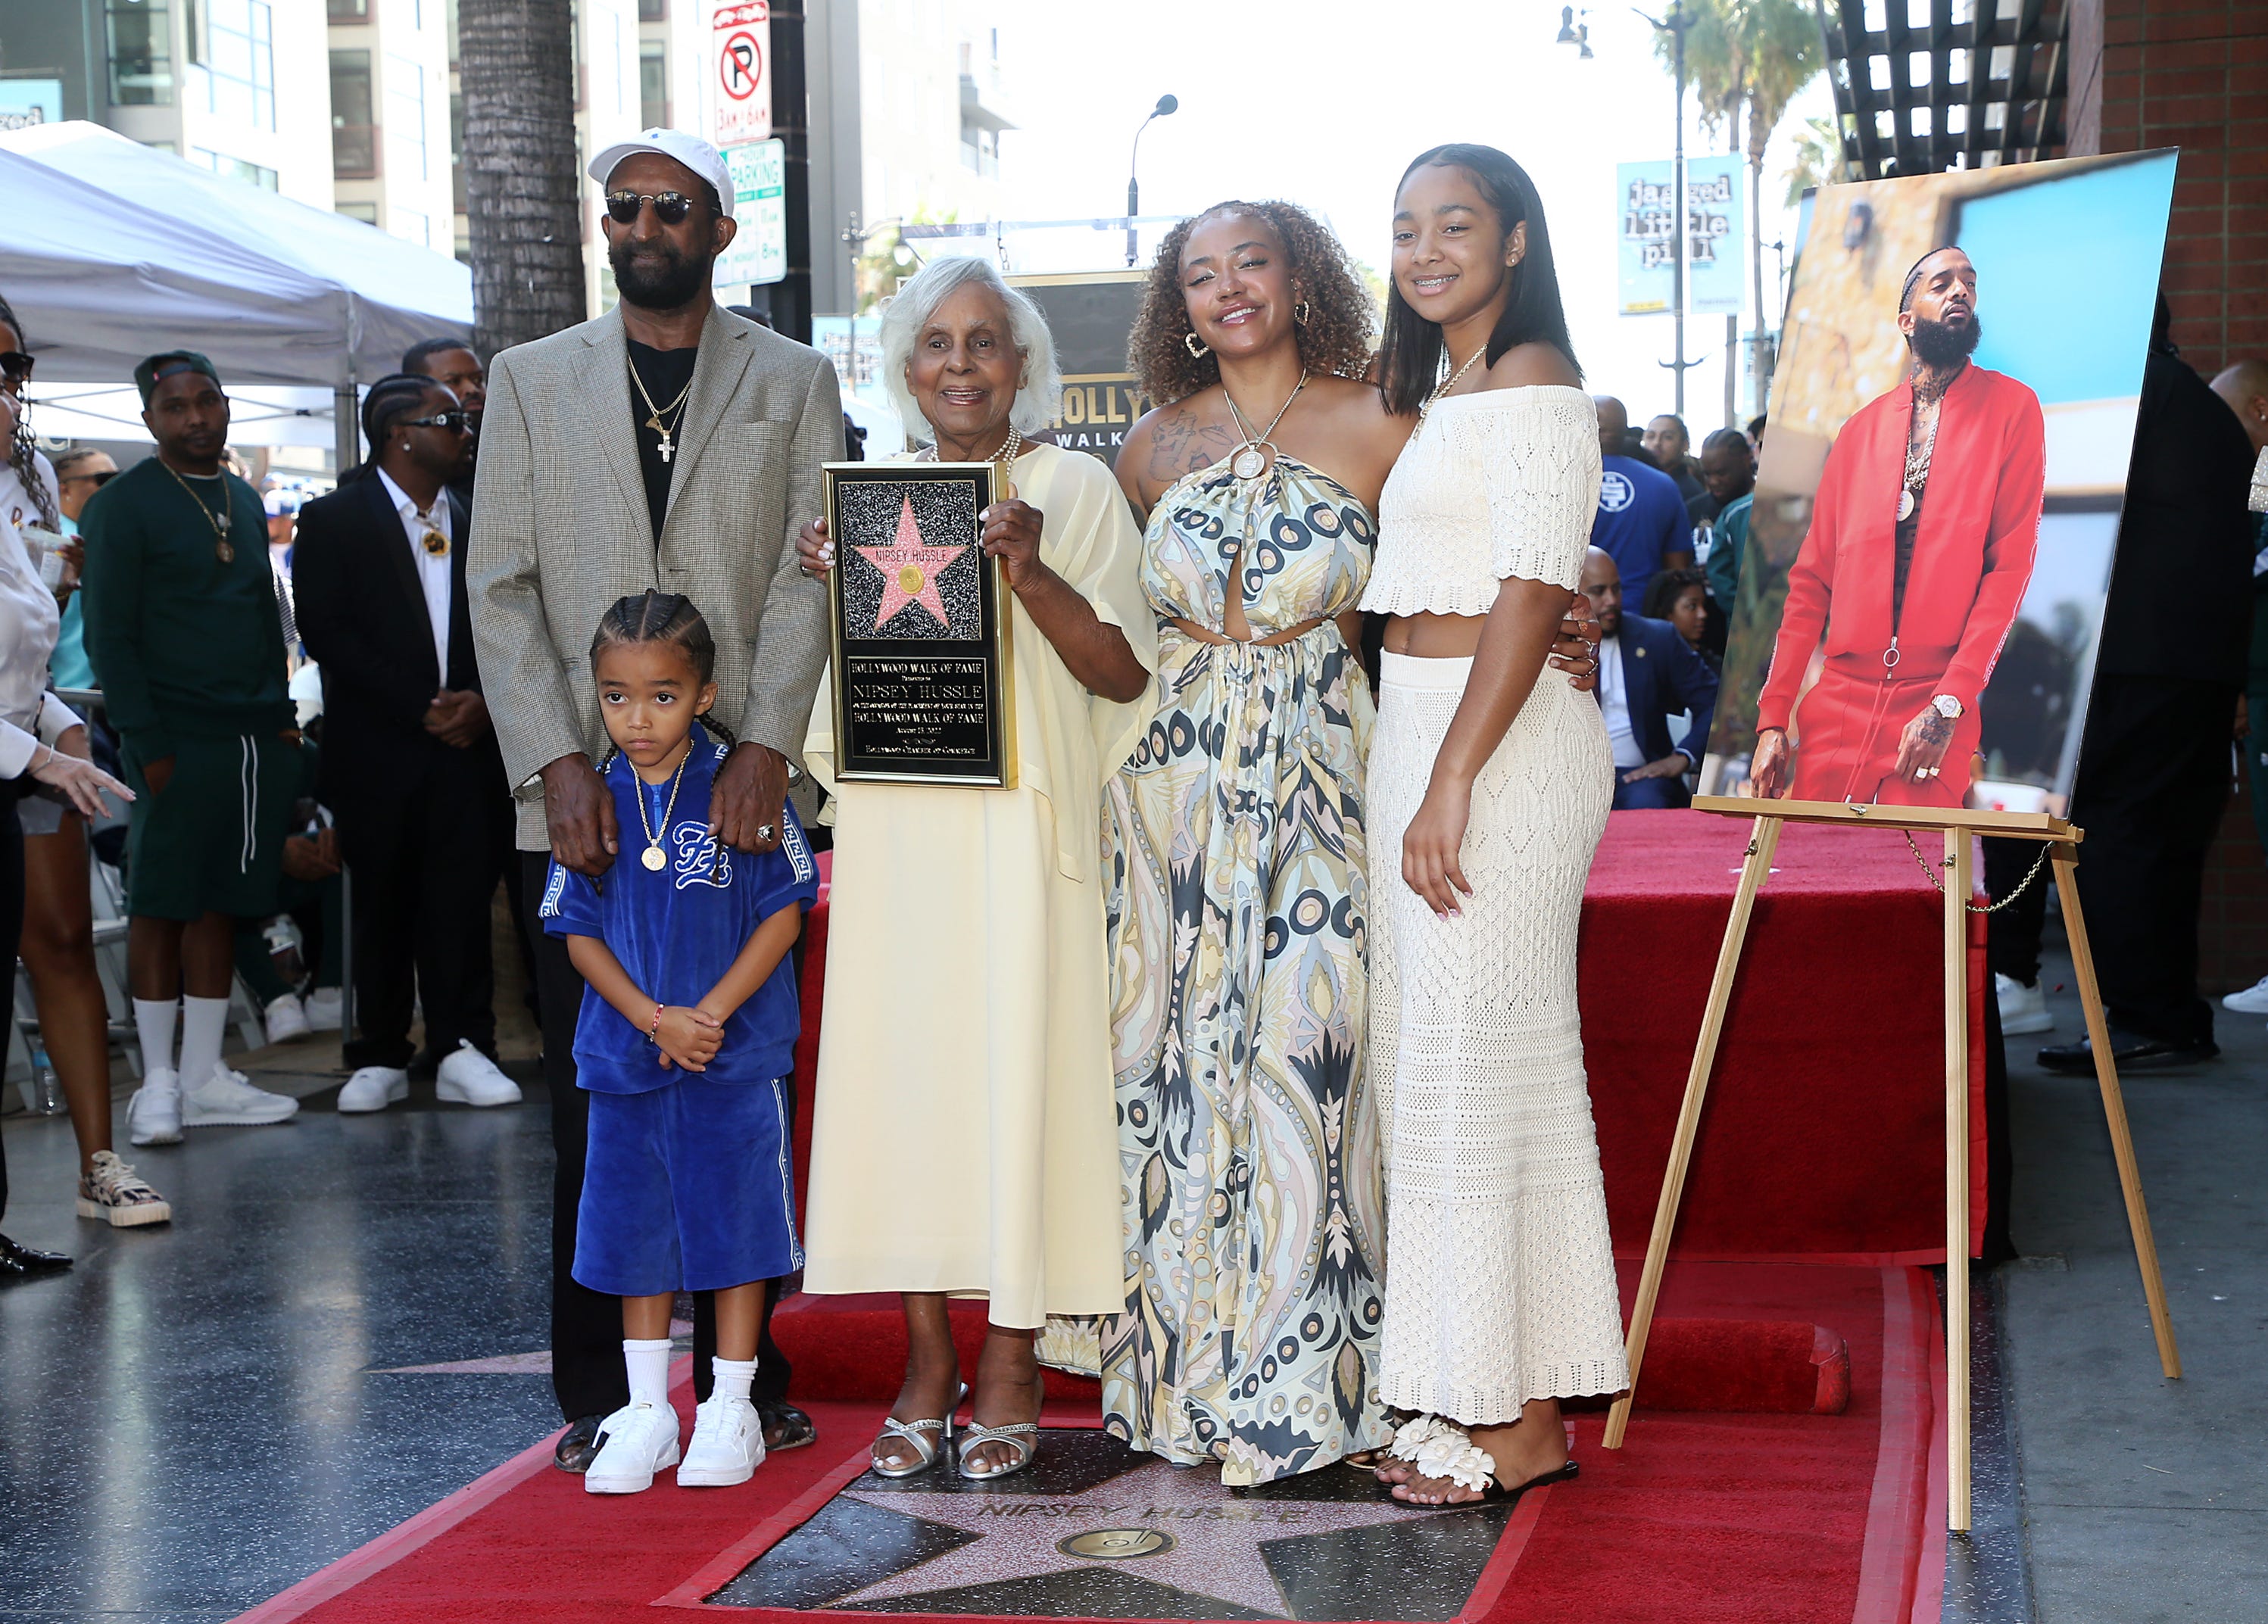 (L-R) Dawit Asghedom, Kross Ermias Asghedom, Margaret Boutte, Samantha Smith and Emani Asghedom stand alongside Nipsey Hussle's Hollywood Walk of Fame star.